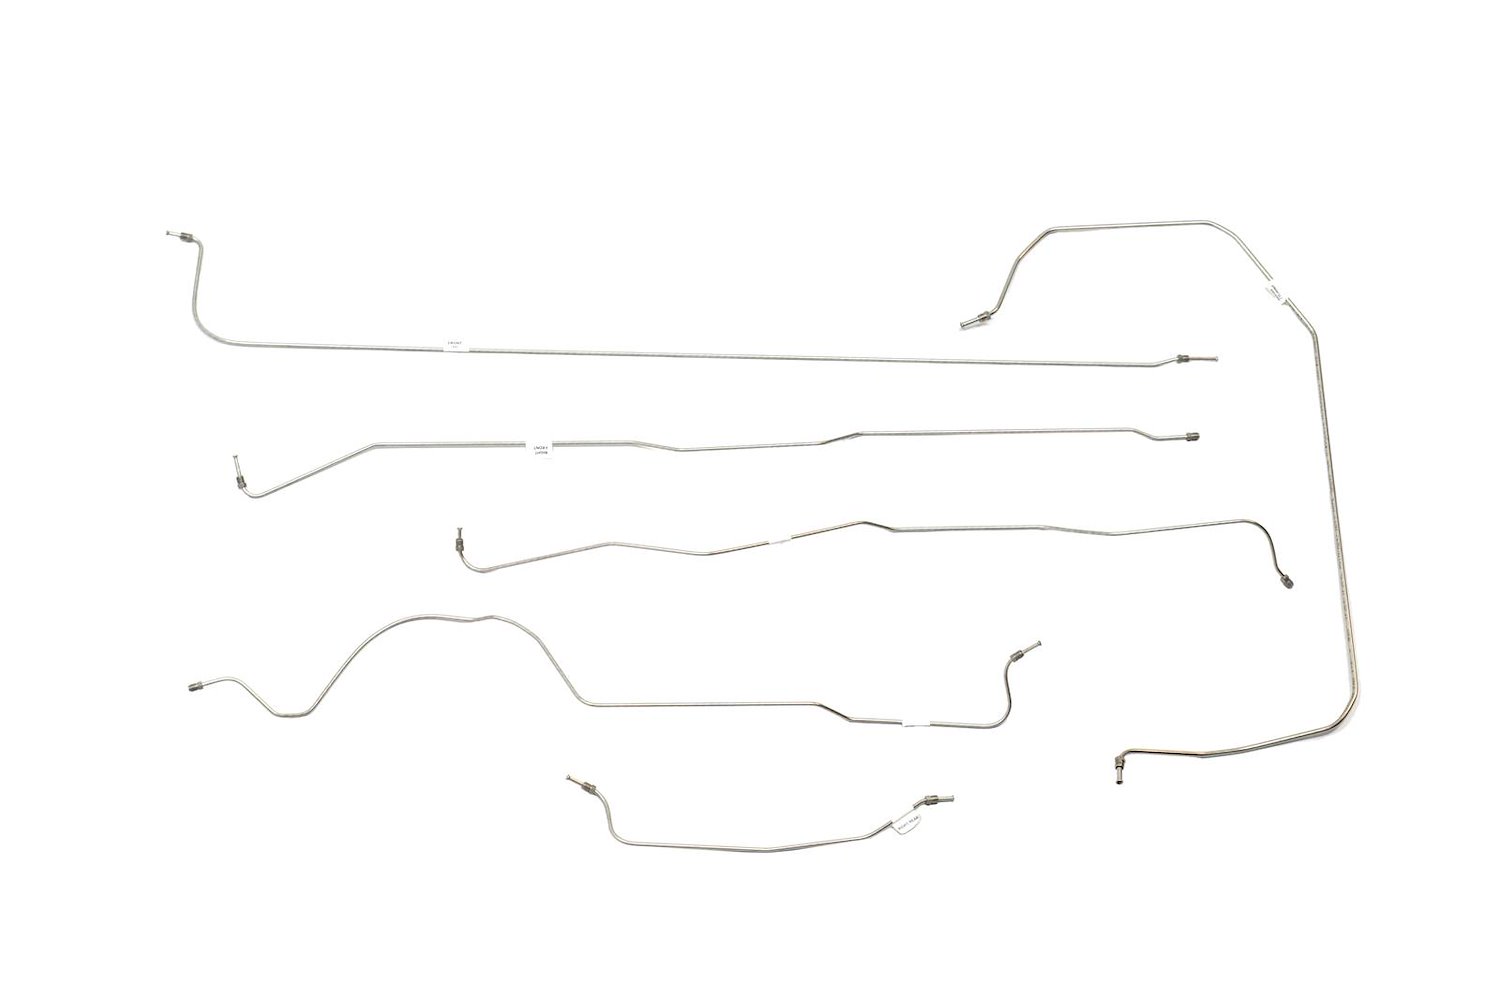 Chevy / GMC Pick Up Brake Line Kits Short Bed - 2nd Series -1955 1956 1957